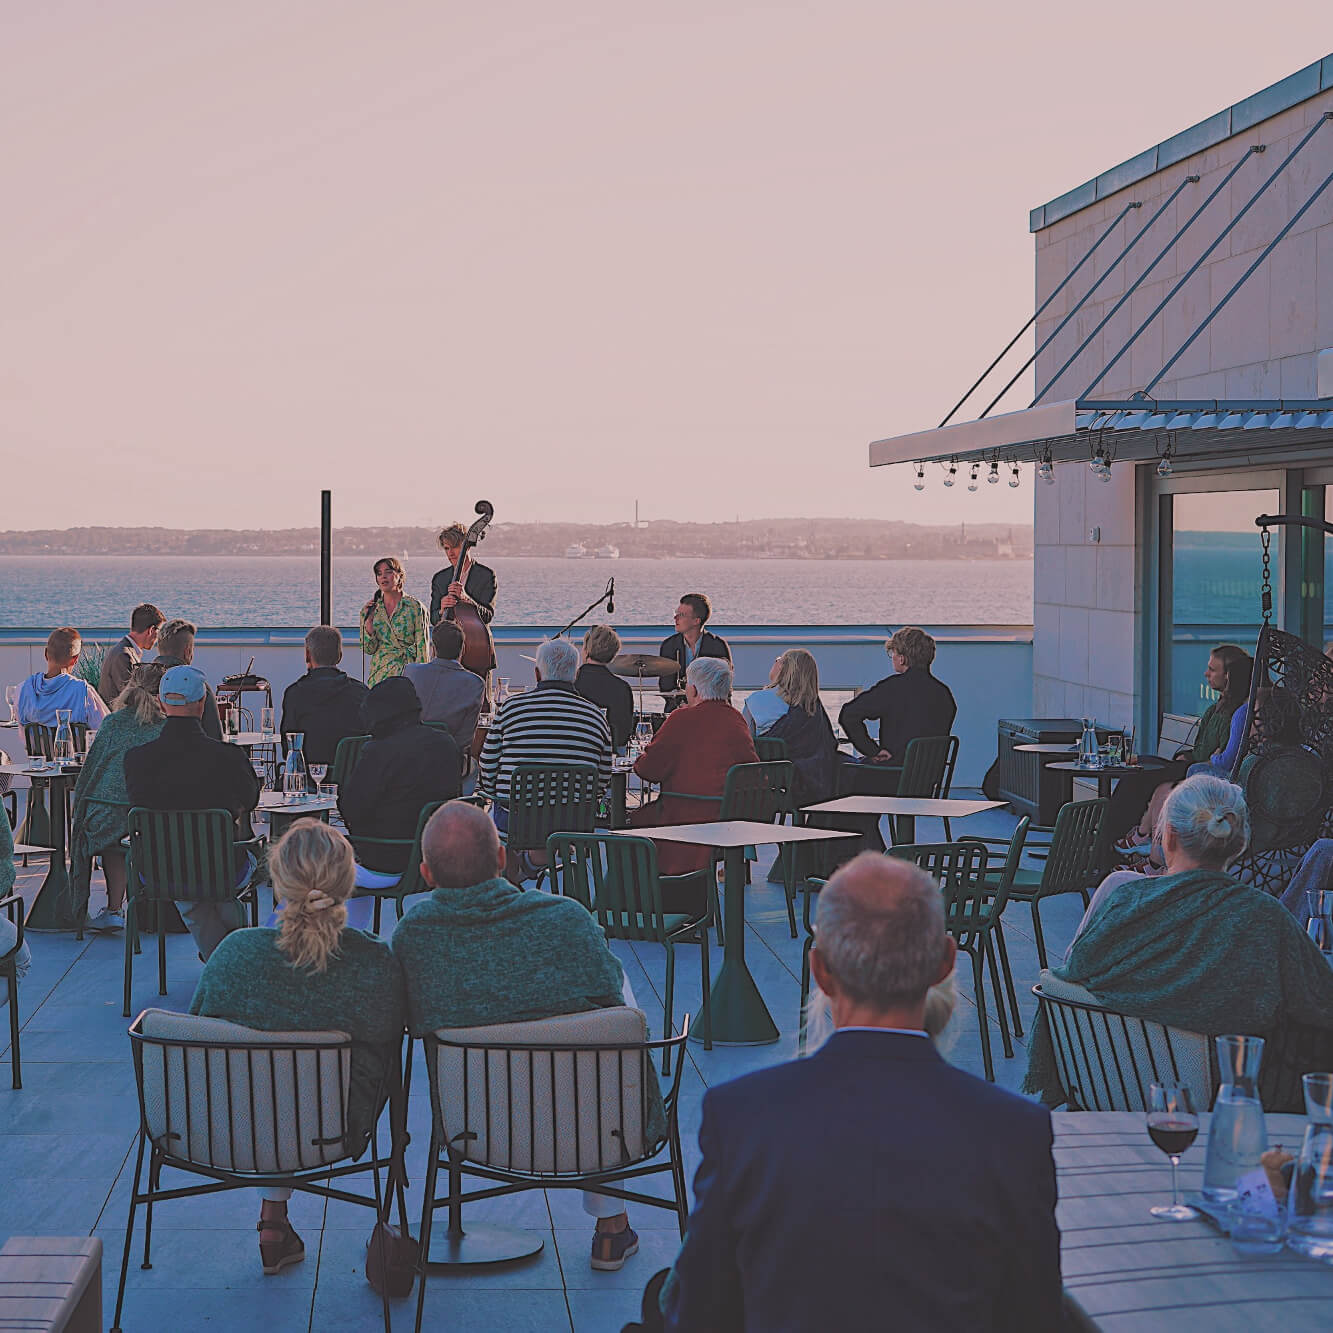 Music event at Rooftop Bar in Helsingborg with sea view. 